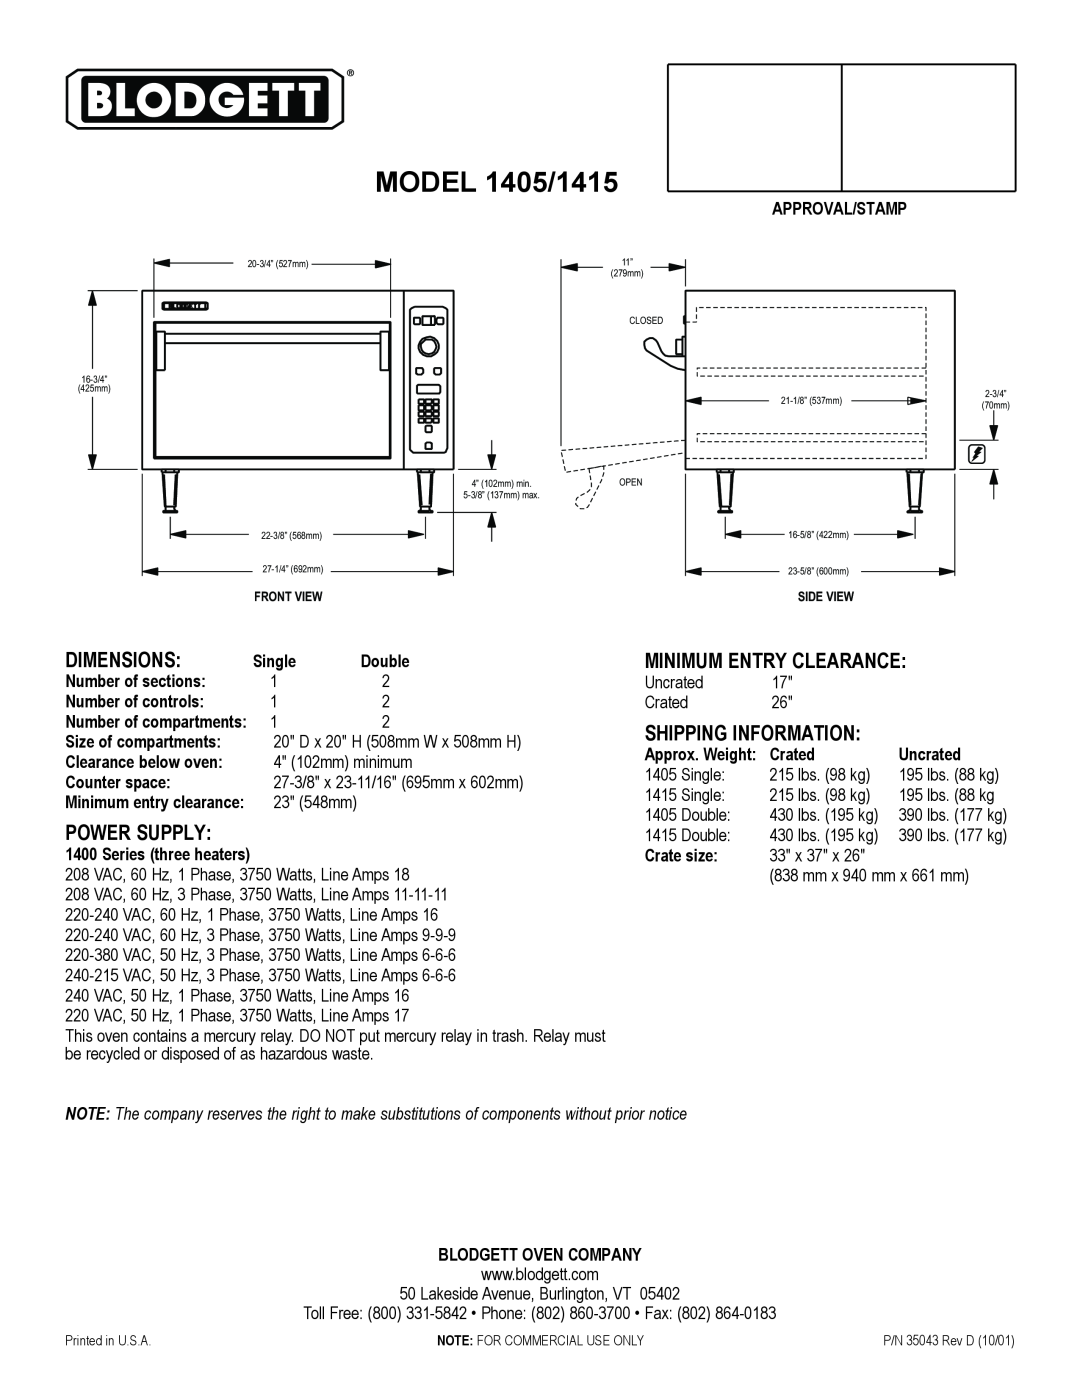 Blodgett warranty Dimensions, Power Supply, Minimum Entry Clearance, Shipping Information, MODEL 1405/1415 